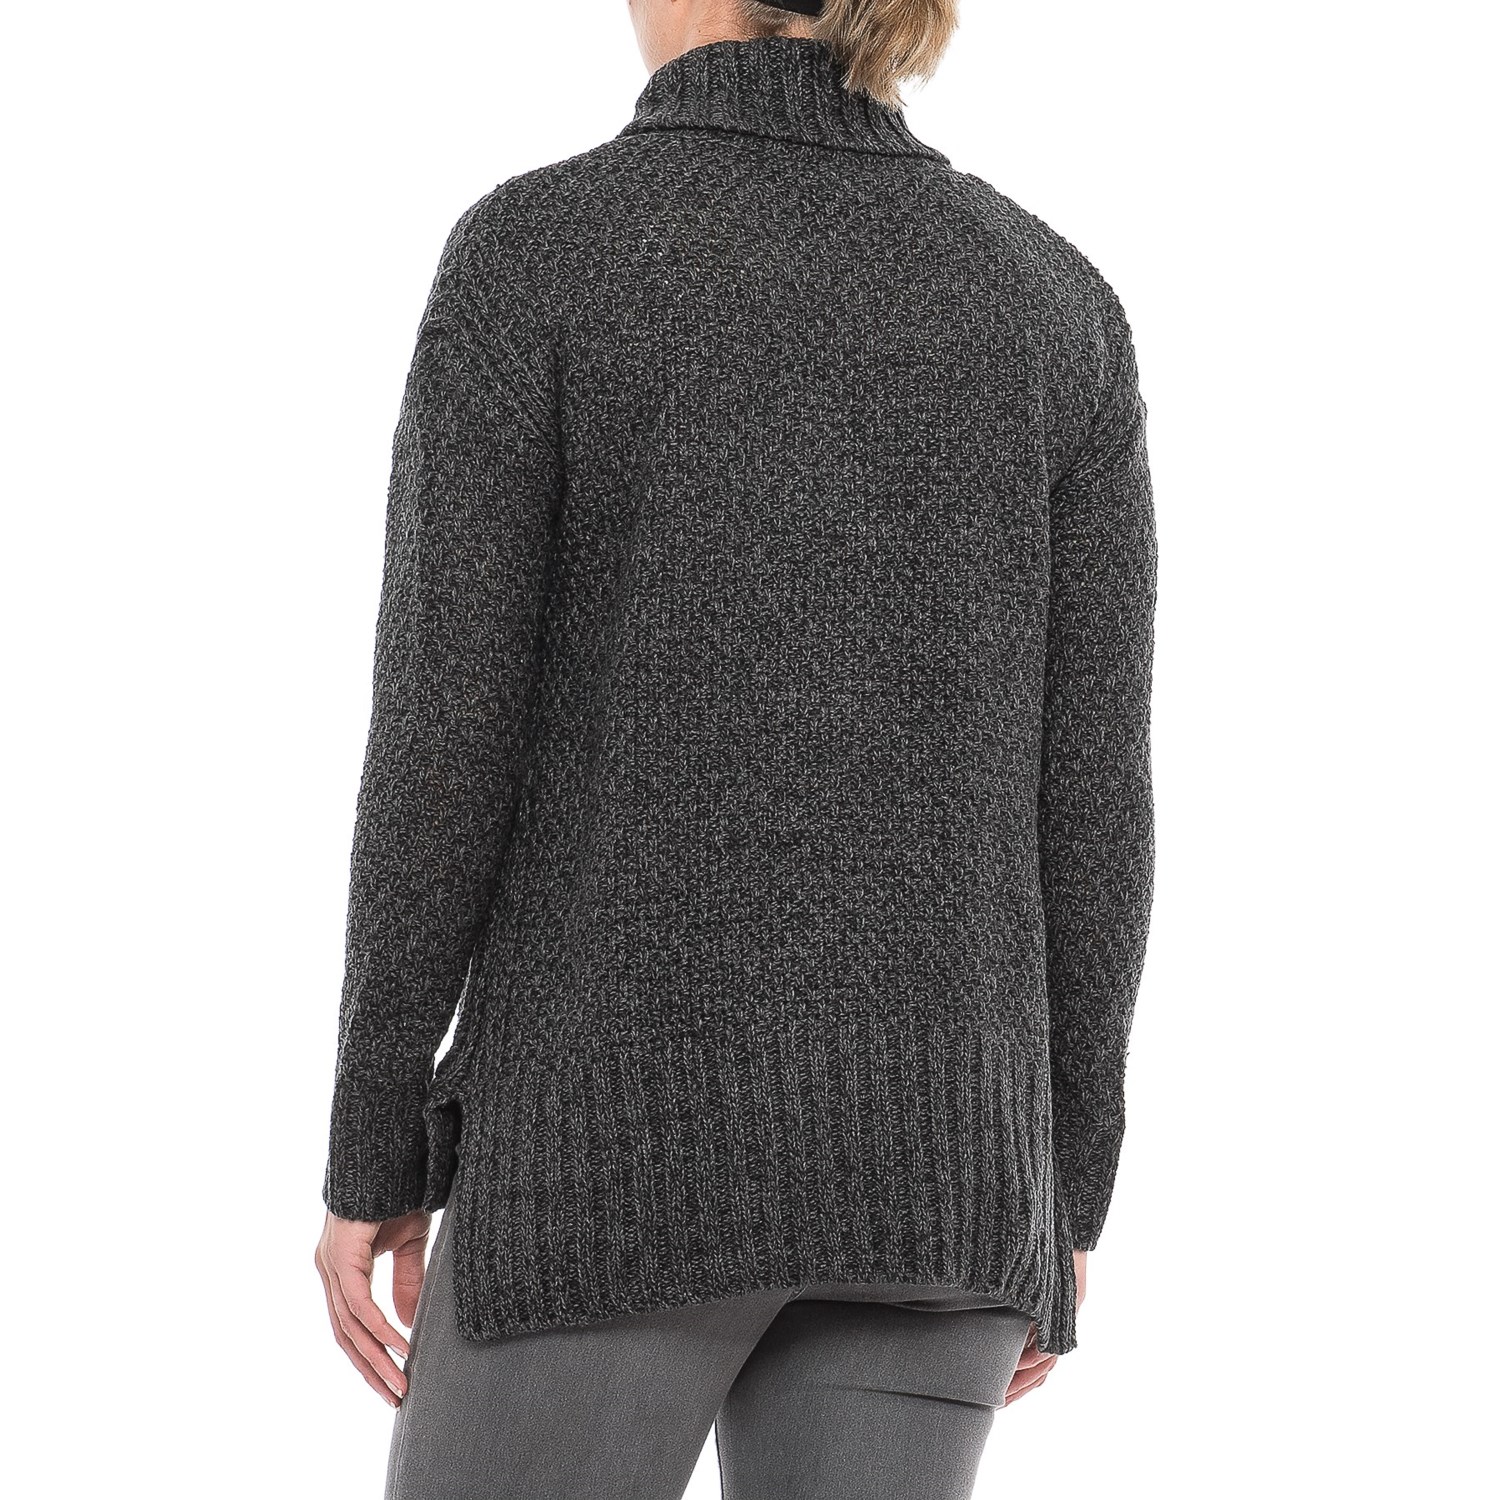 Chelsea & Theodore High-Low Turtleneck Sweater (For Women) - Save 59%